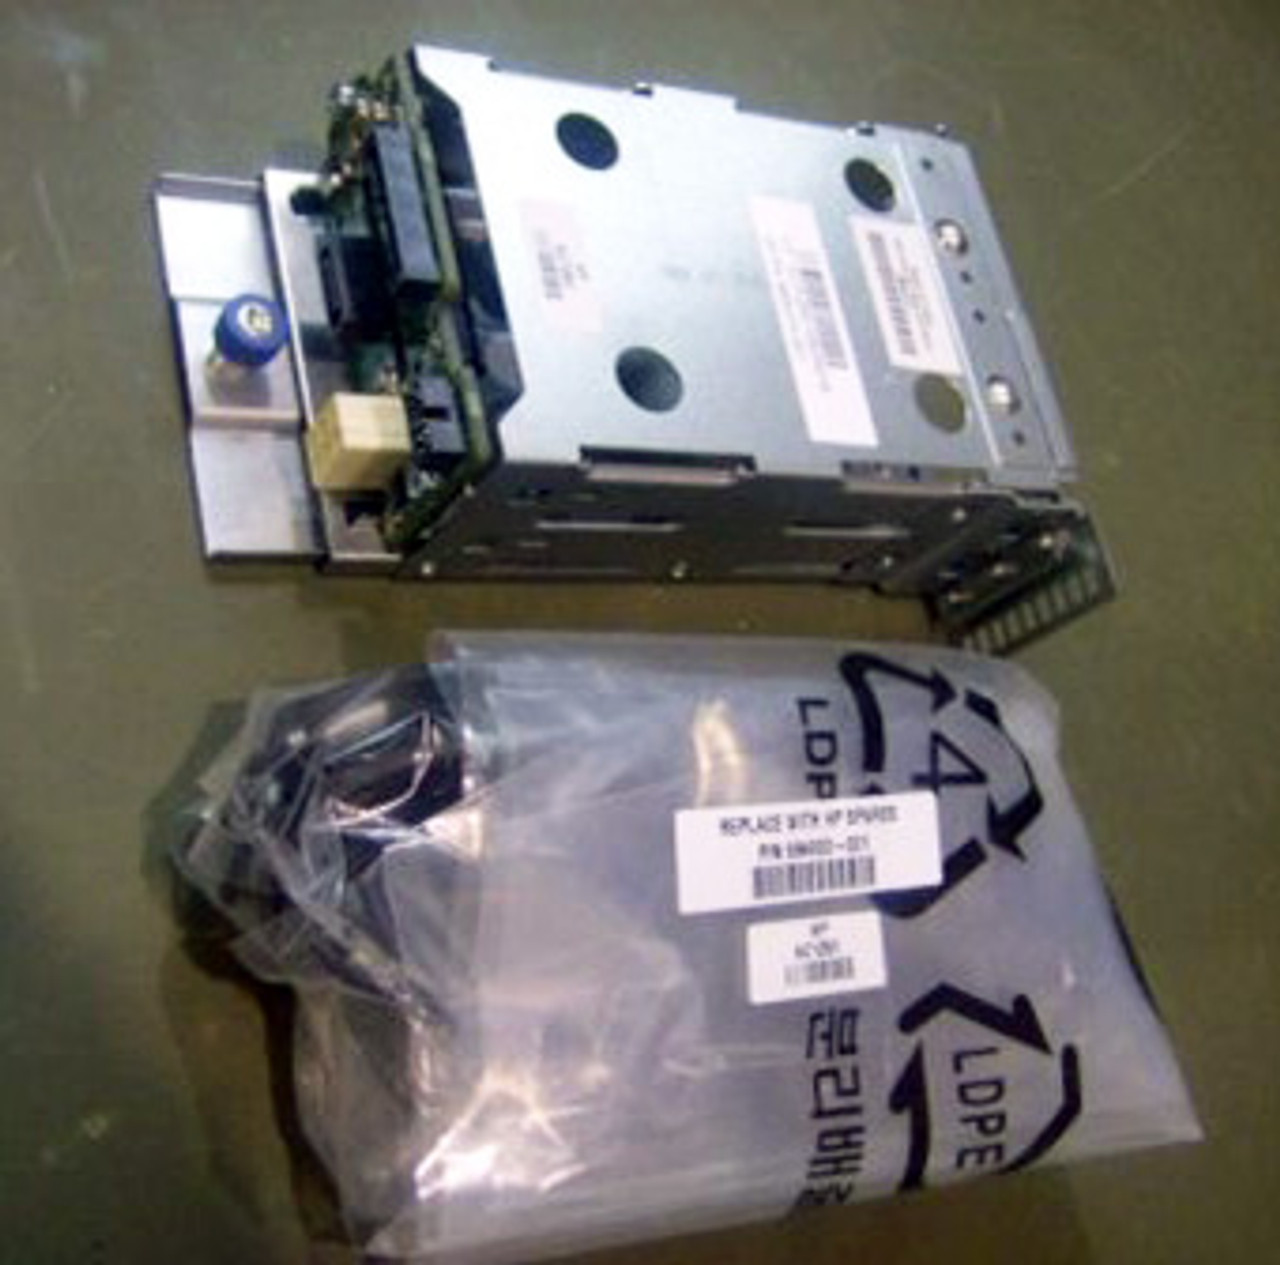 SPS-CAGE 2SFF REAR HDD MEDIA - 684900-001